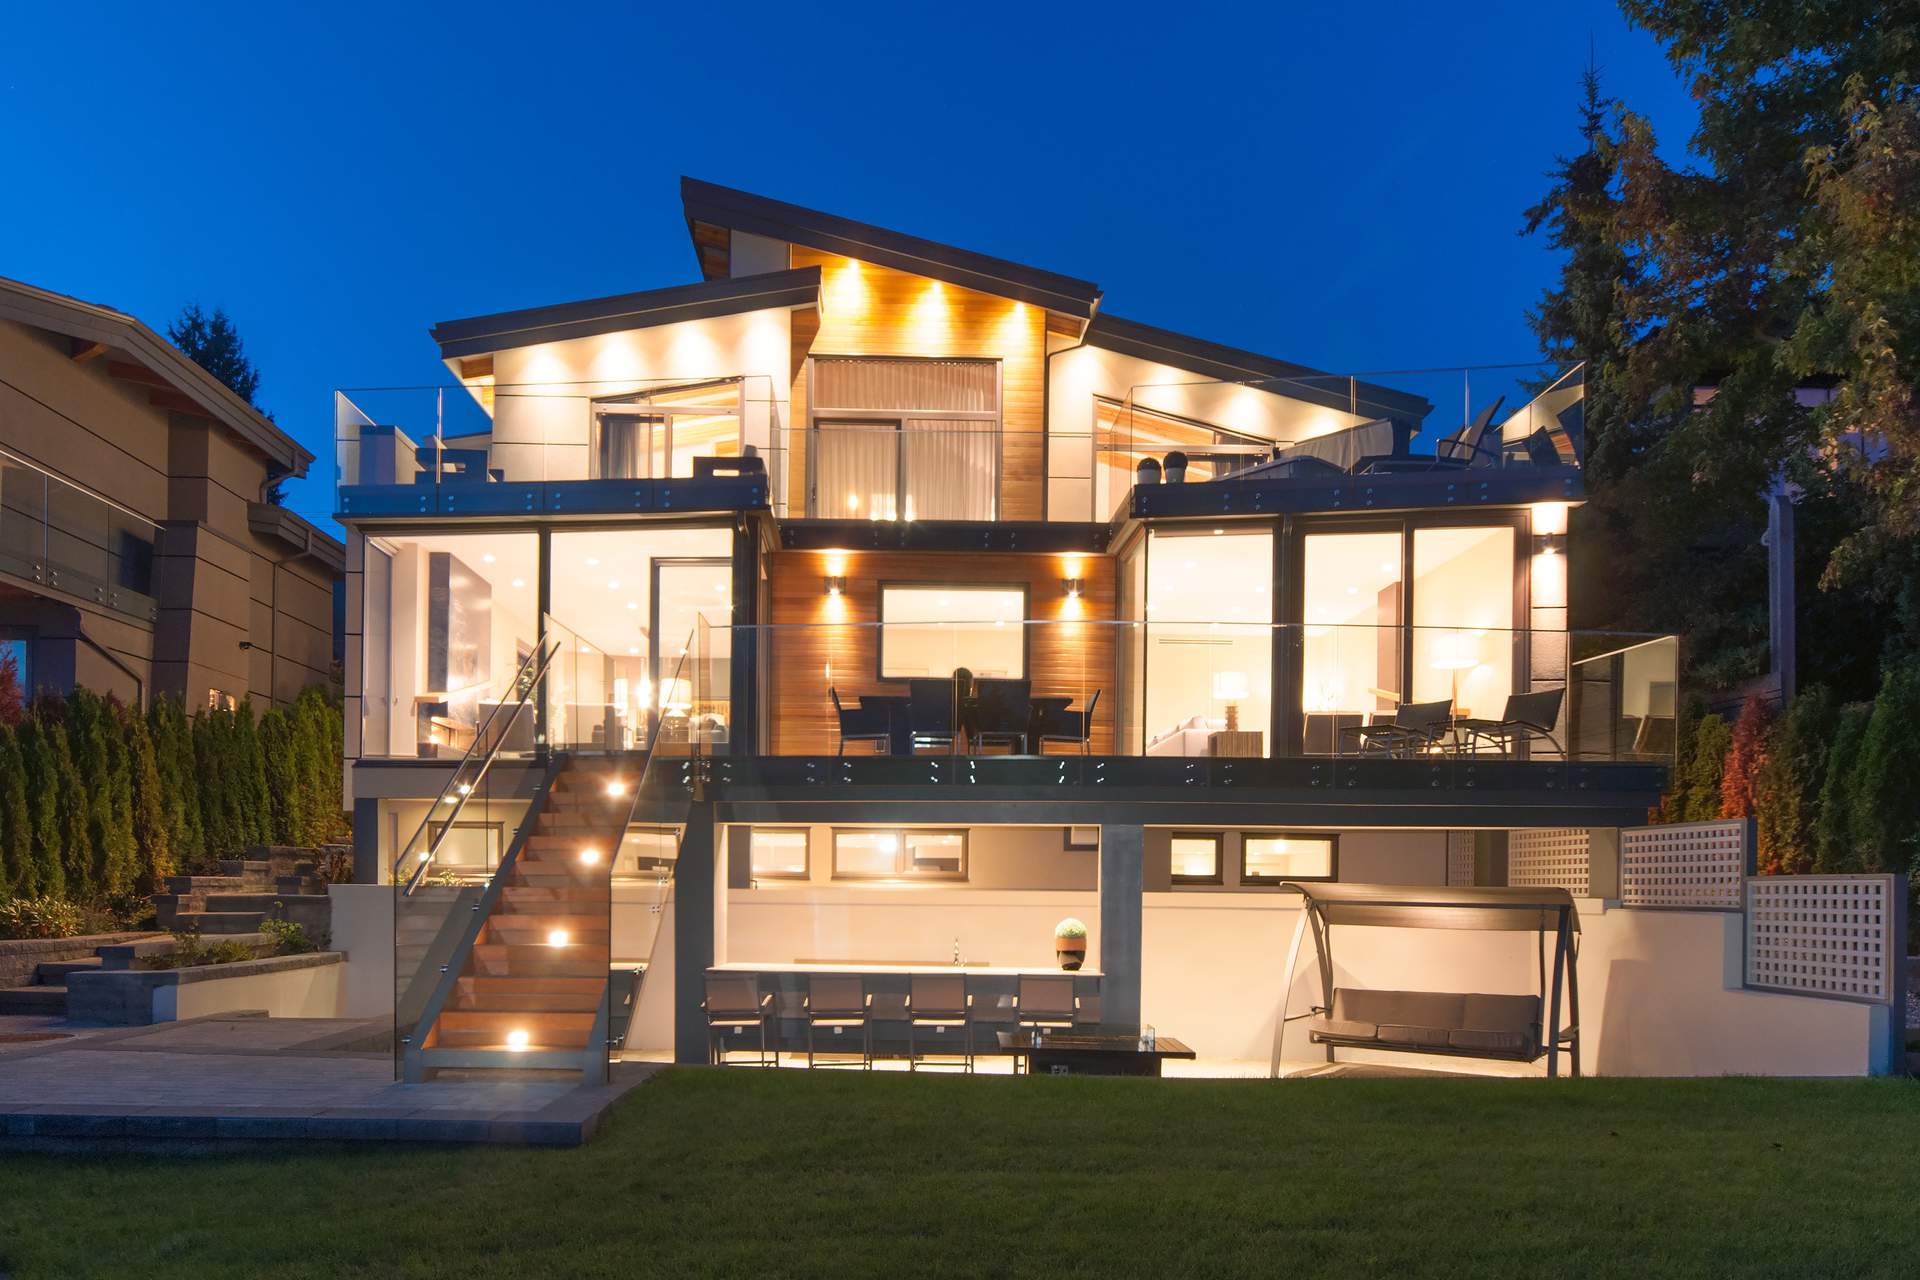 PHOTOS: Check out the 11 most expensive homes in Canada